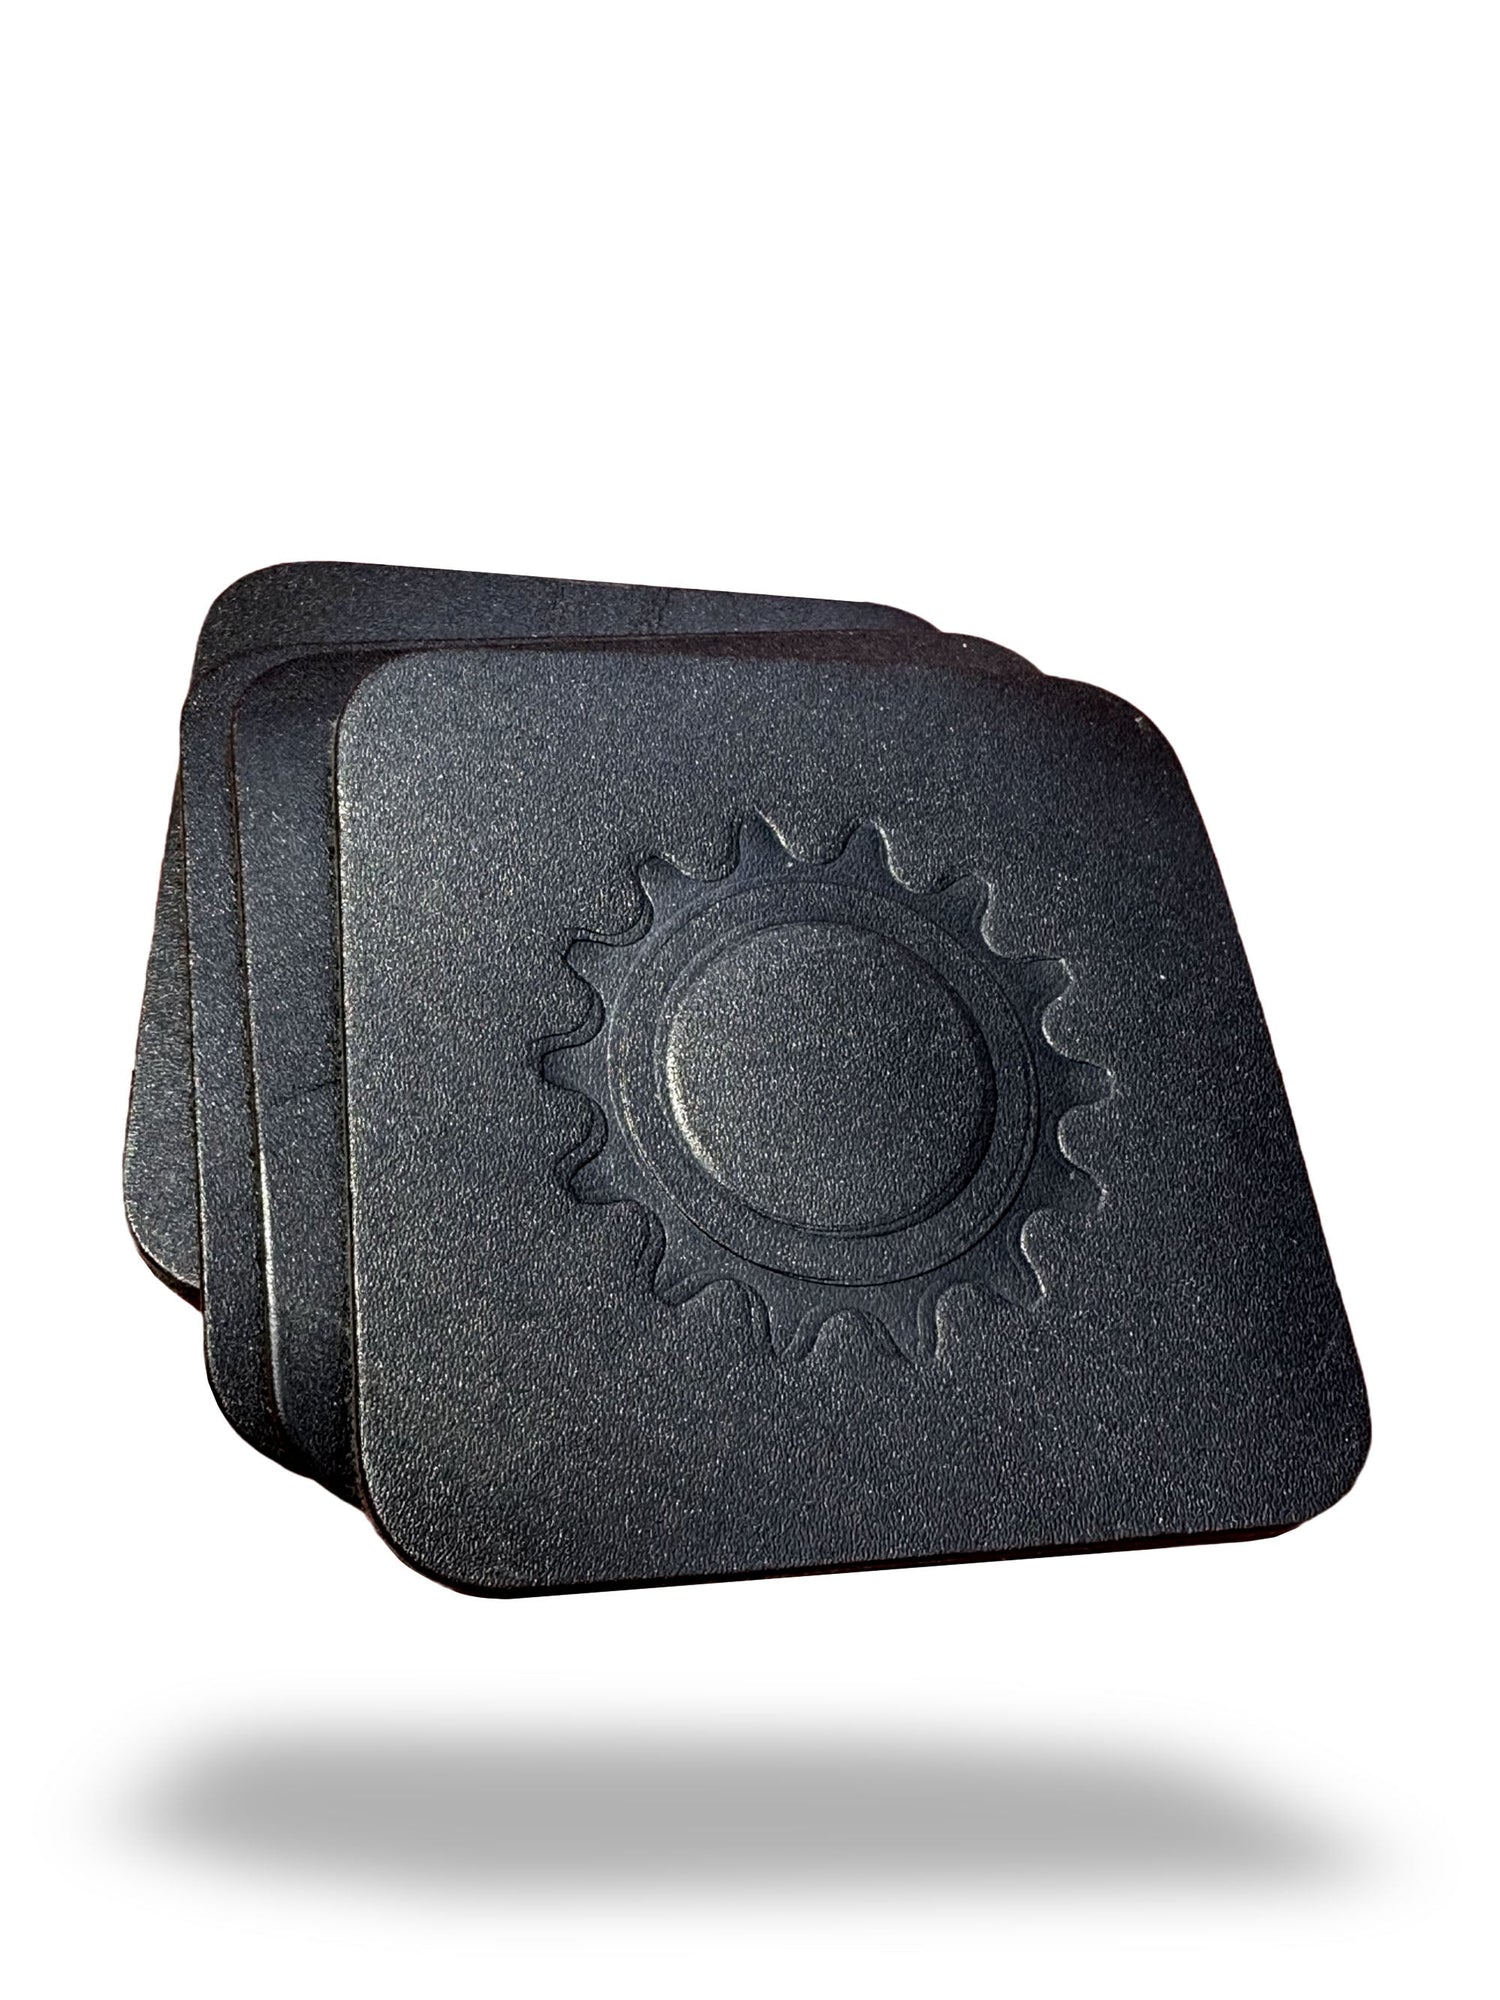 Square Leather Coasters with Bicycle Cog Design - Set of 4